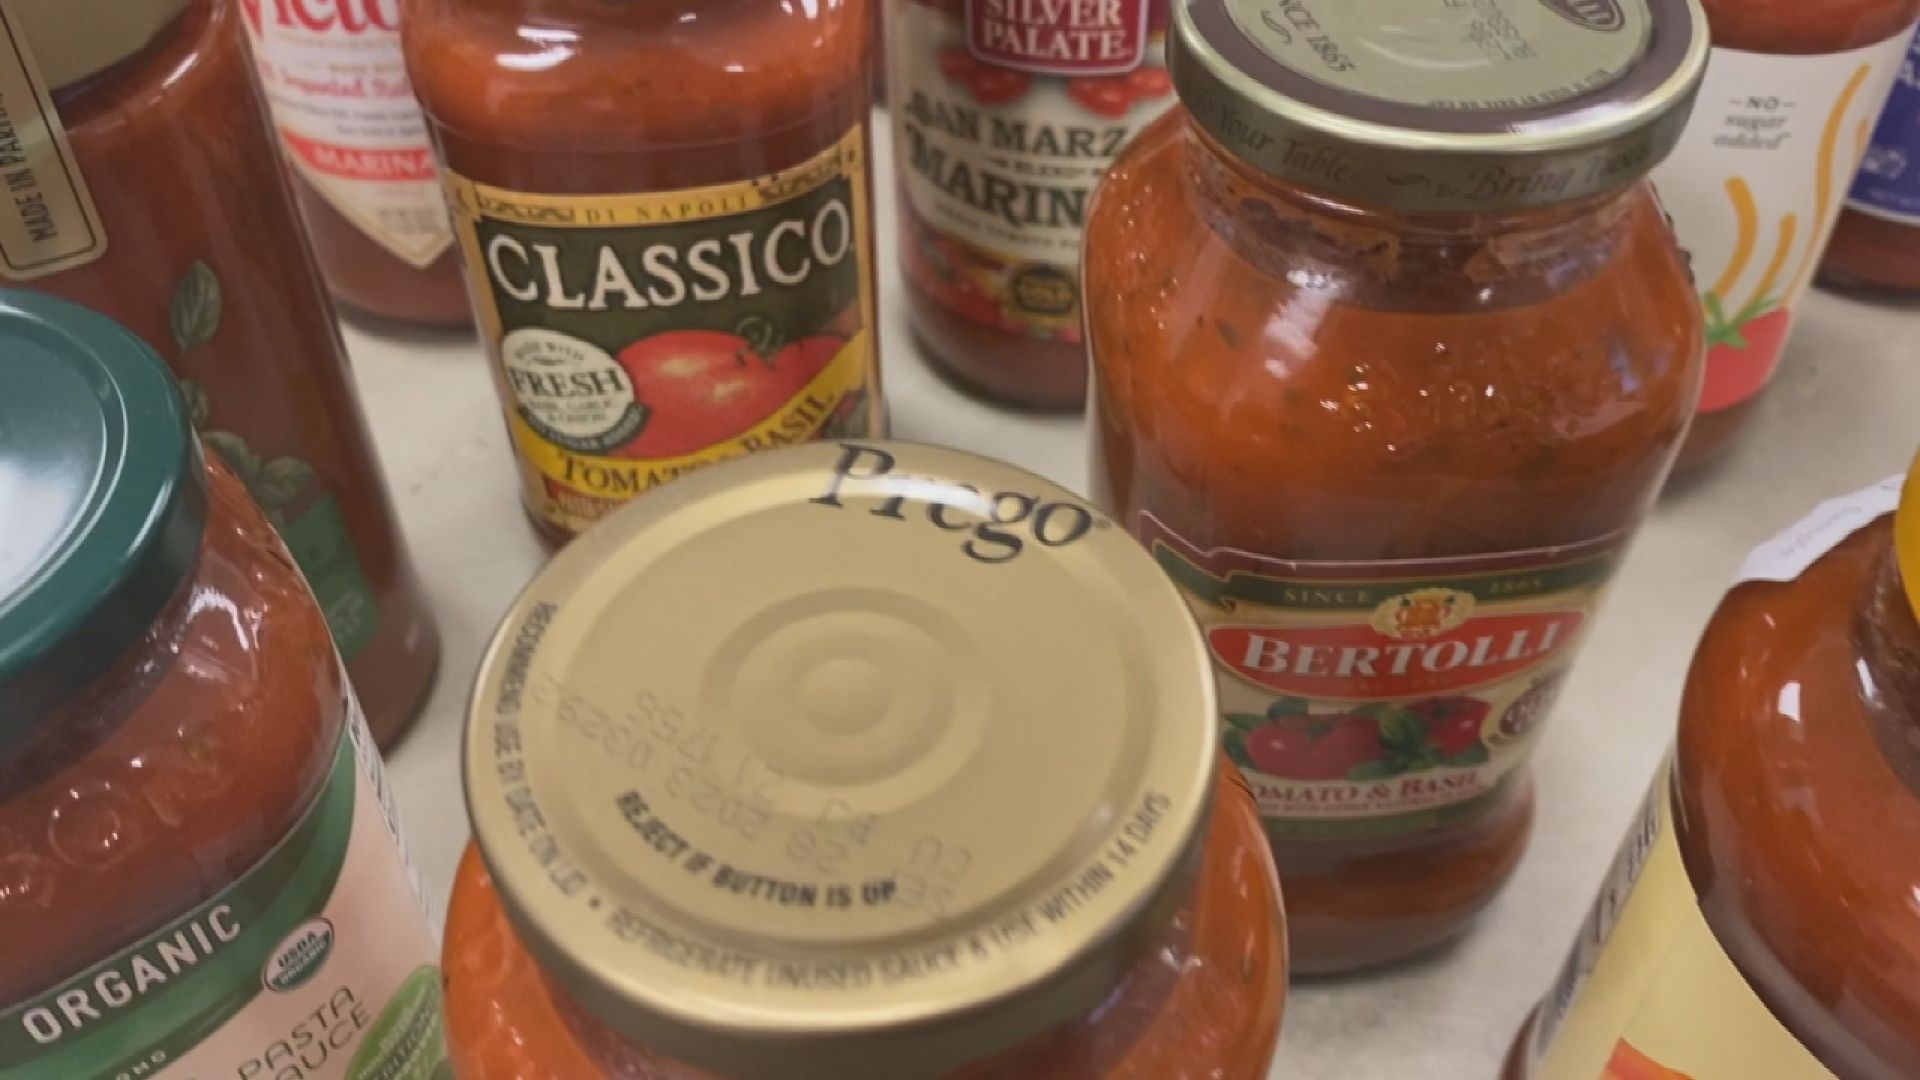 Consumer Reports Taste Tests Store-Bought Tomato Sauce